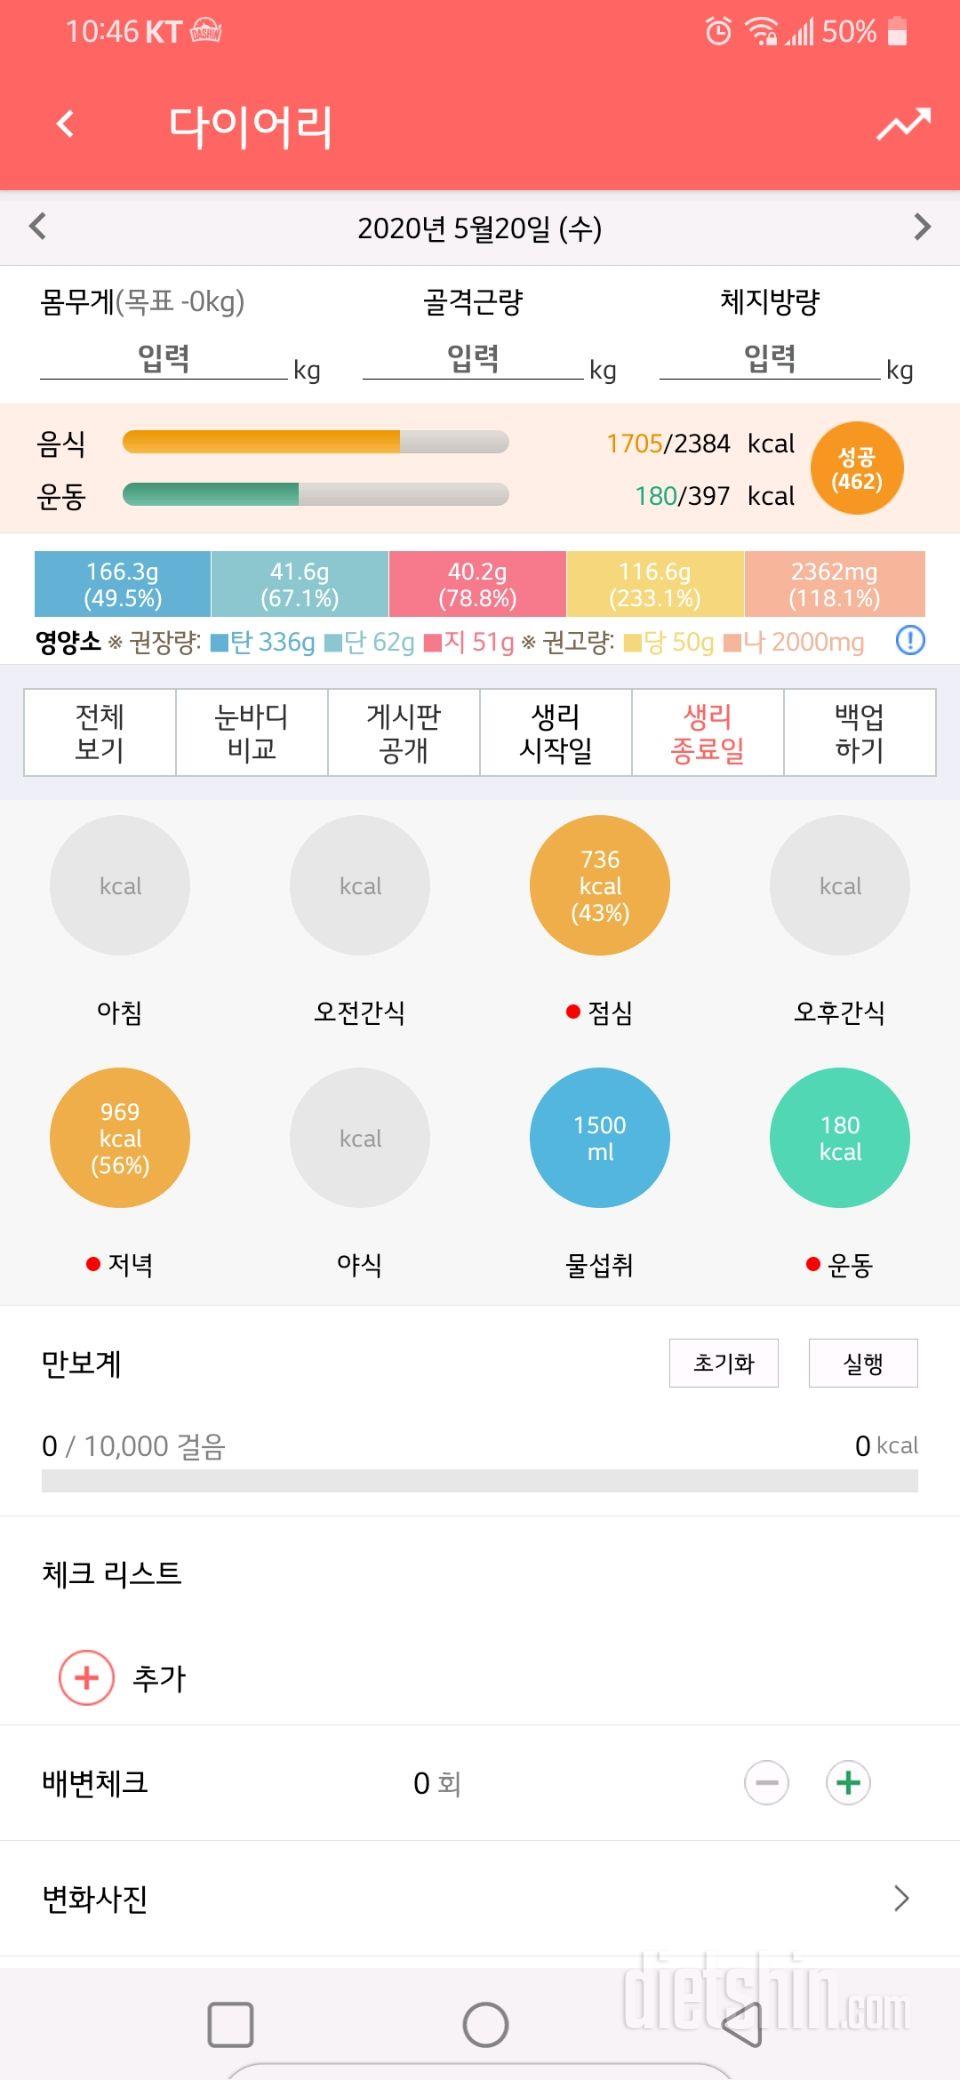 5월20일 수욜